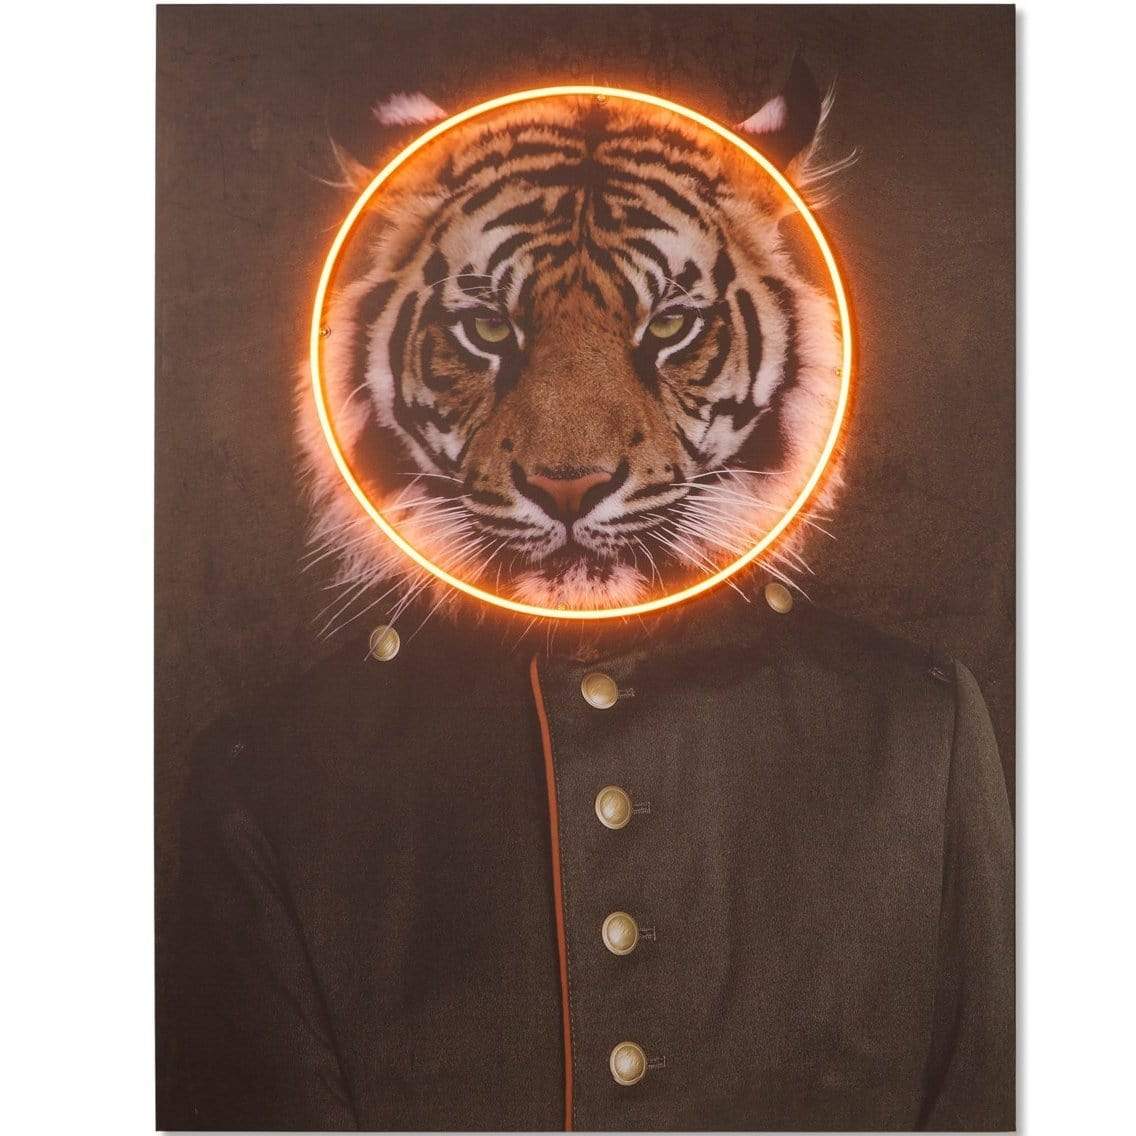 Coup & Co. Tiger Portrait Print Wall coup-co-1206492